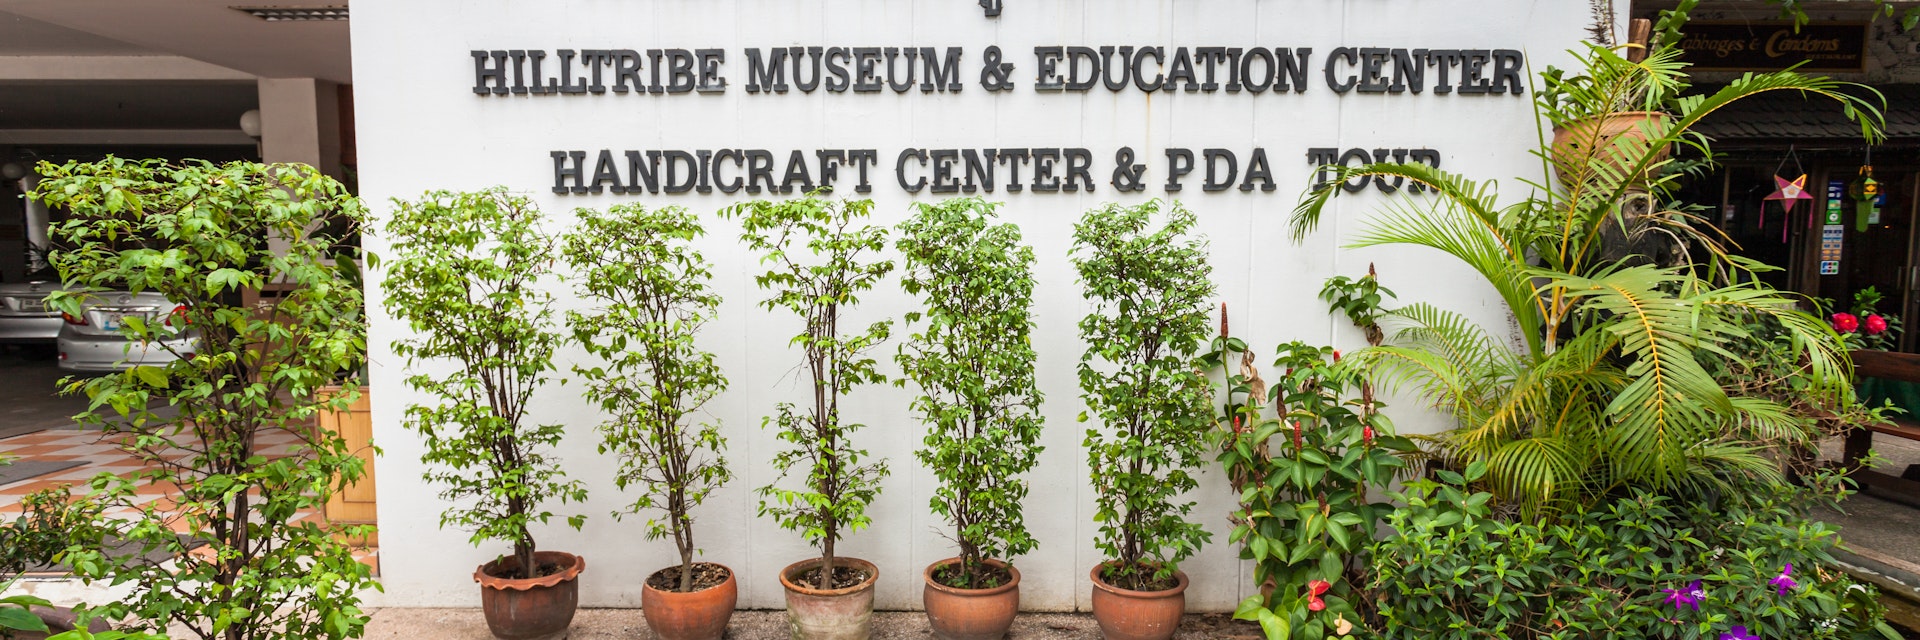 Hill Tribe Museum and Education Center, Chiang Rai, Thailand.